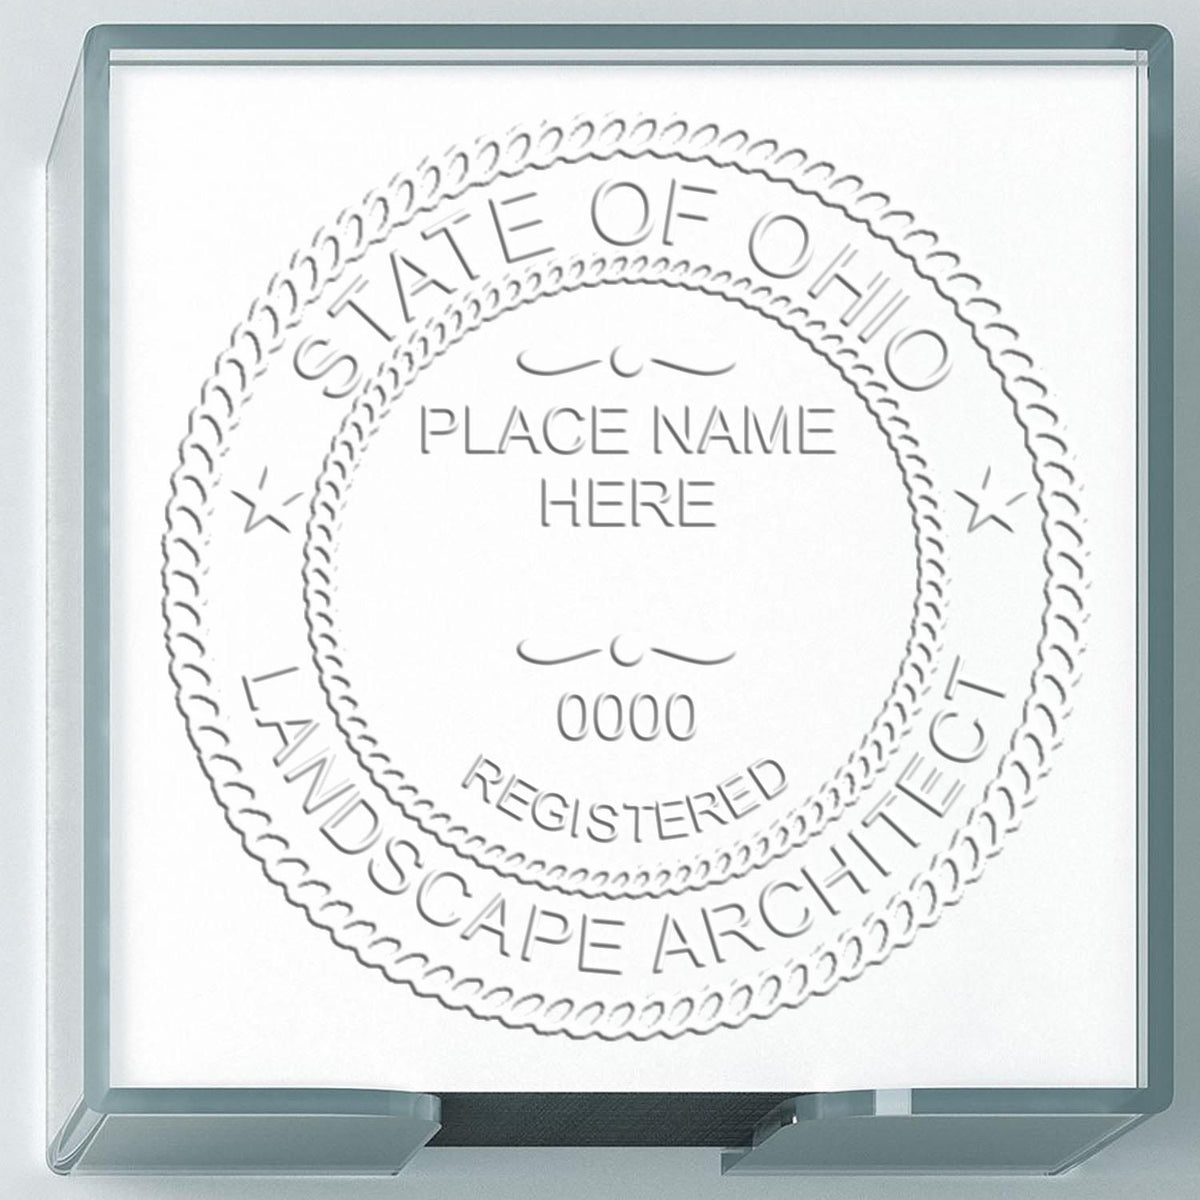 An in use photo of the Hybrid Ohio Landscape Architect Seal showing a sample imprint on a cardstock